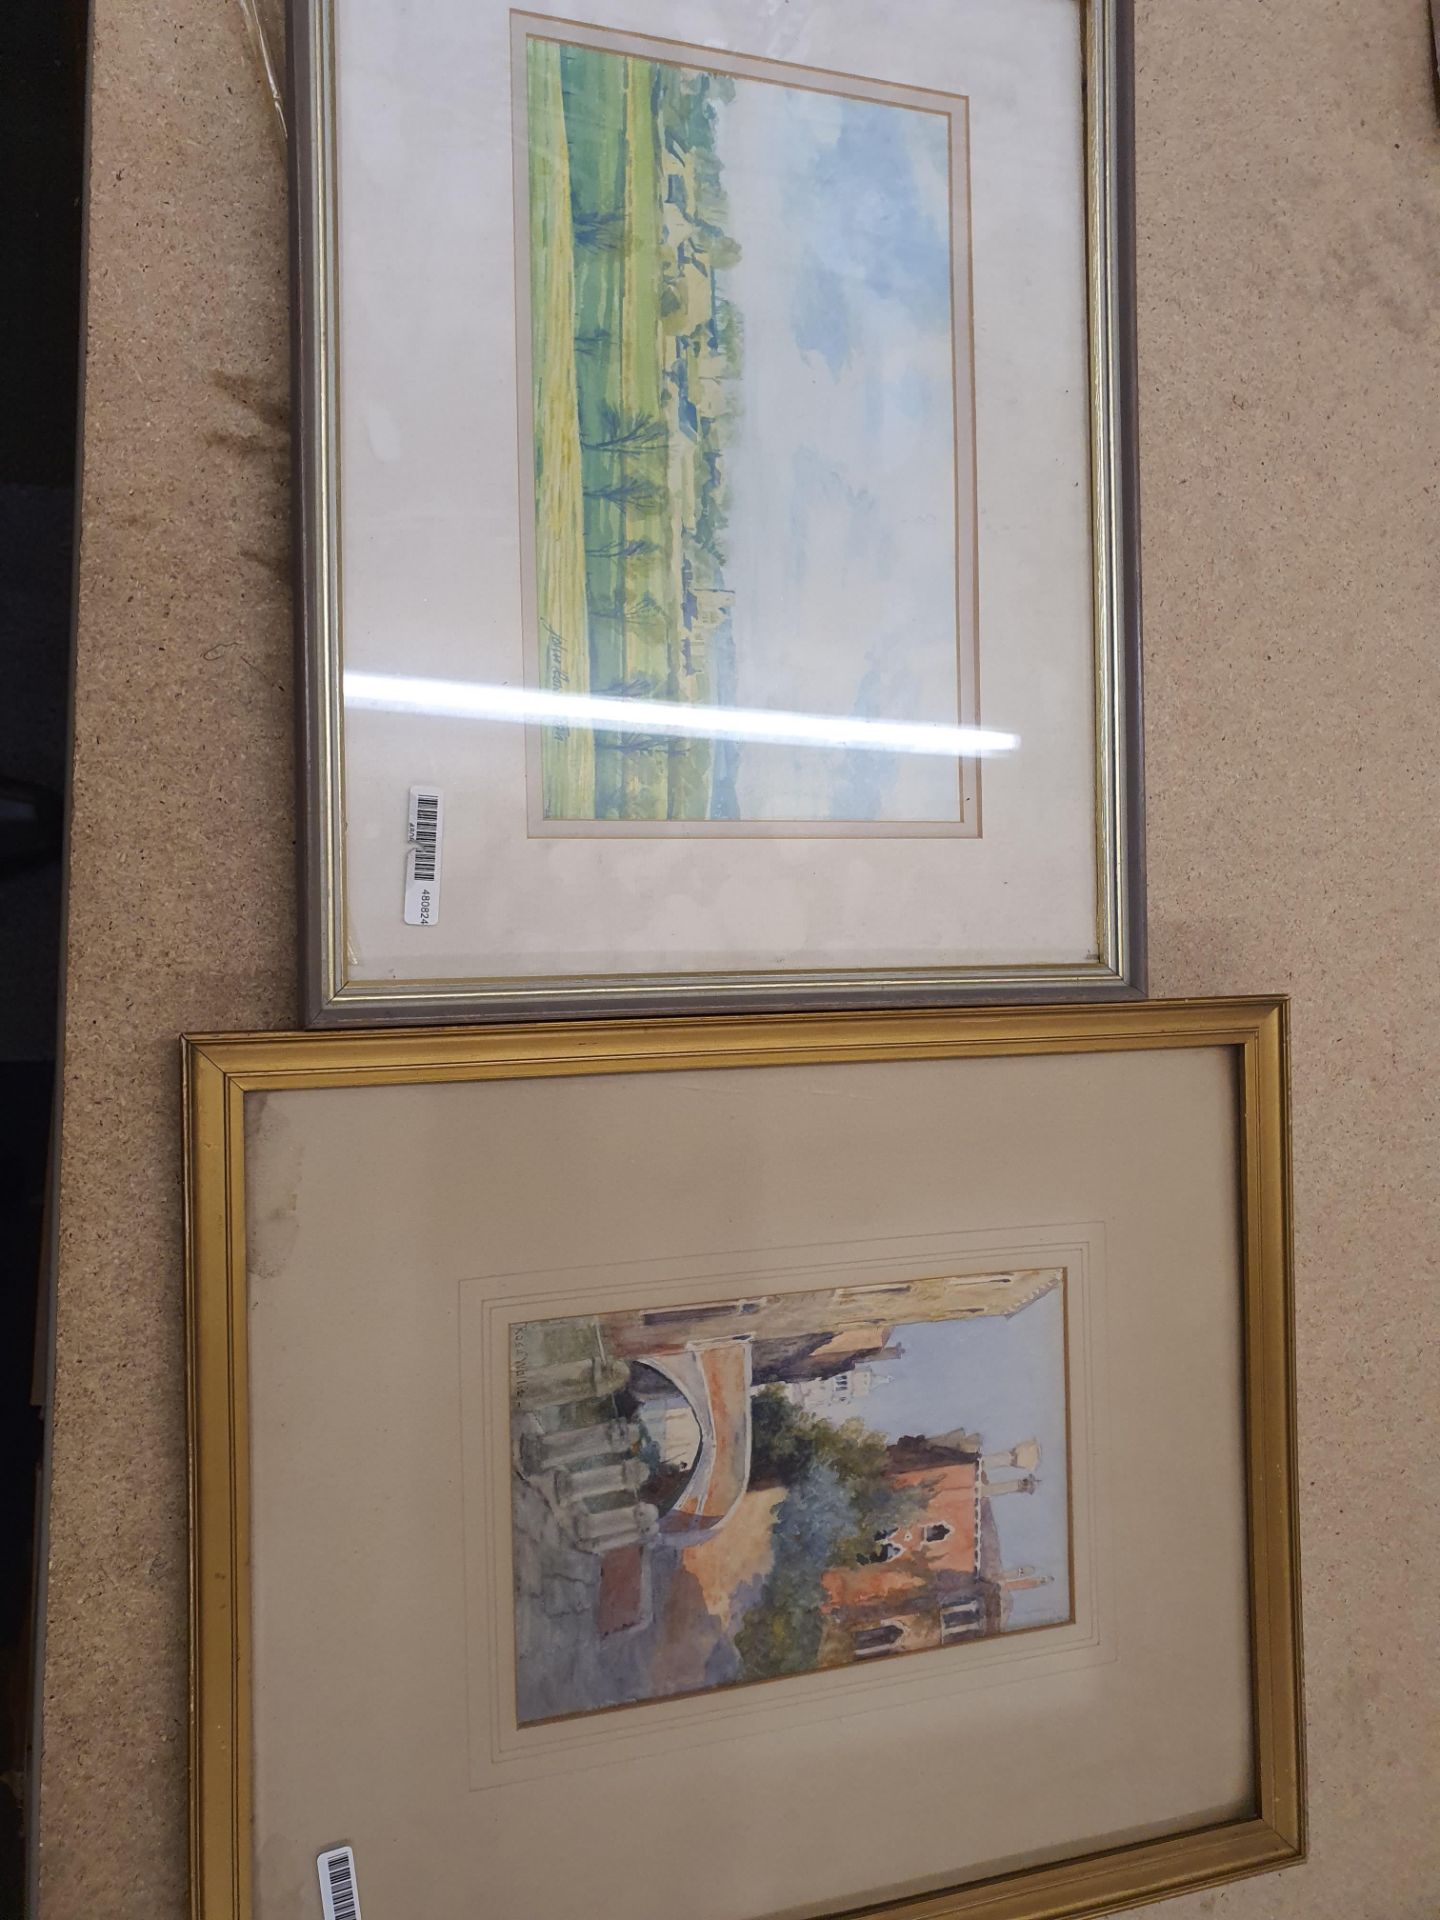 No VAT Grade U Two Gilt Framed Prints - One Of Countyside Scene And One Canal Scene - Image 3 of 4